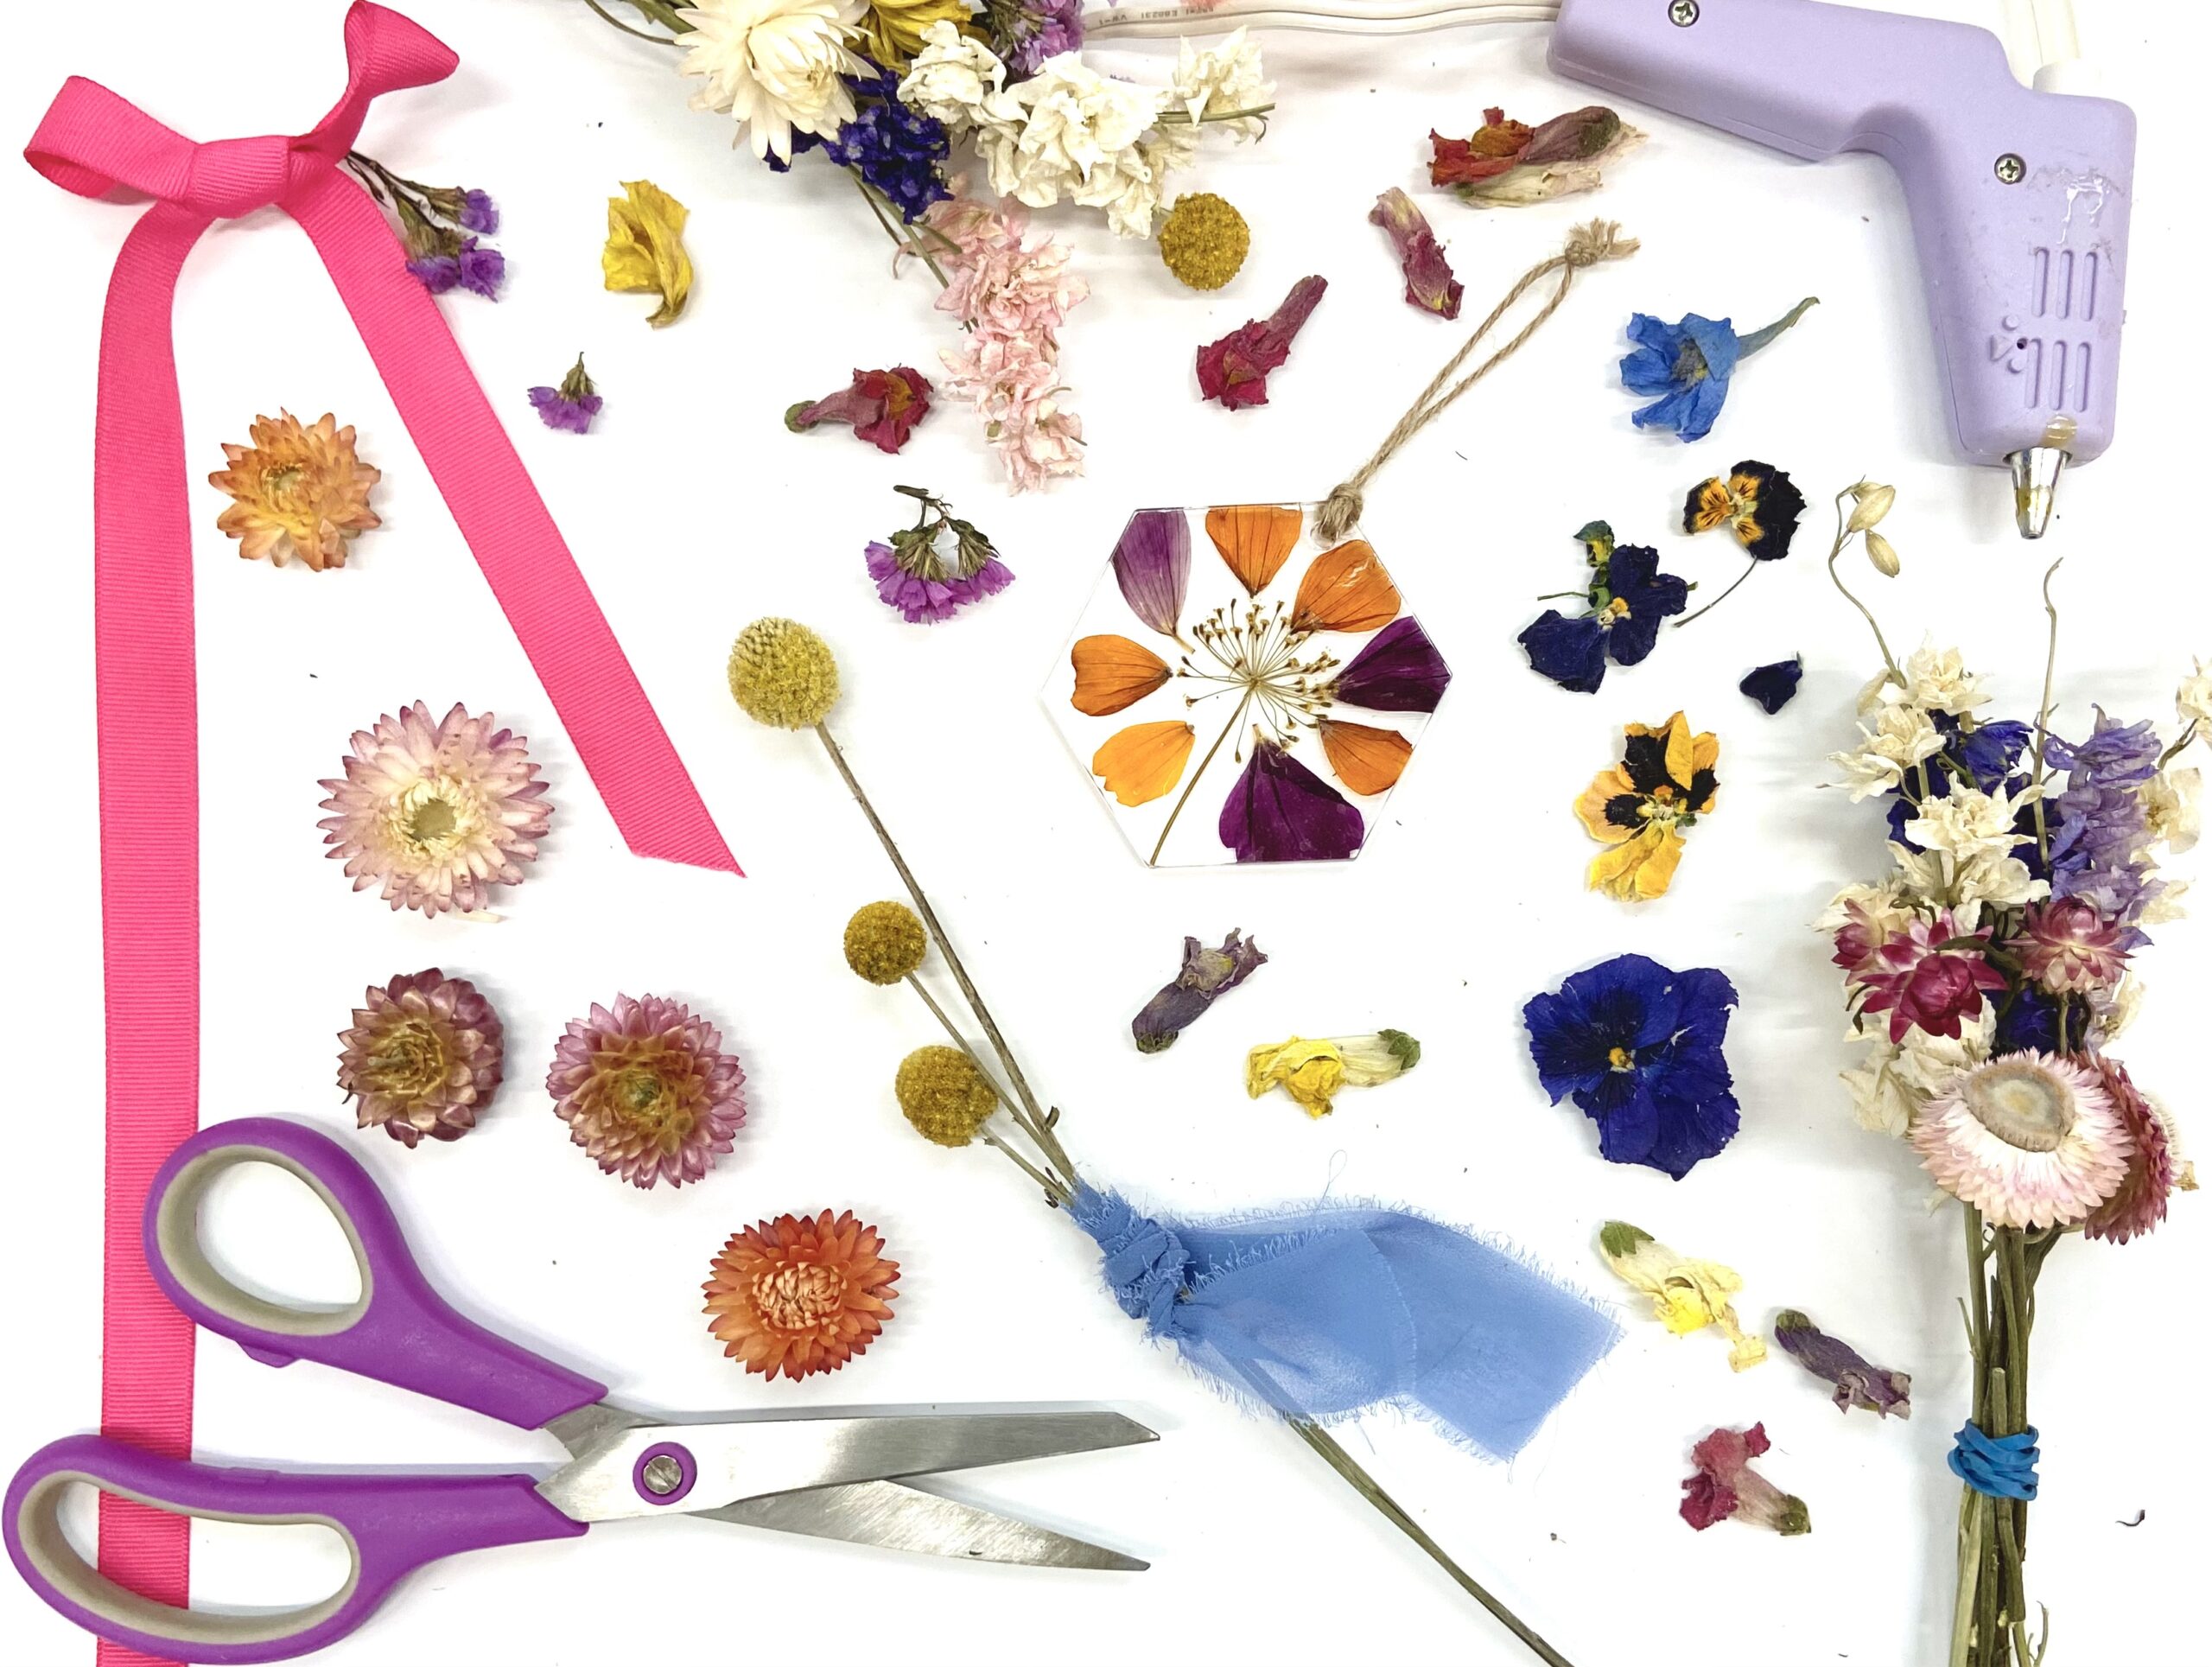 Flat lay on white background of scissors, glue gun, ribbon, and dried flowers for crafting